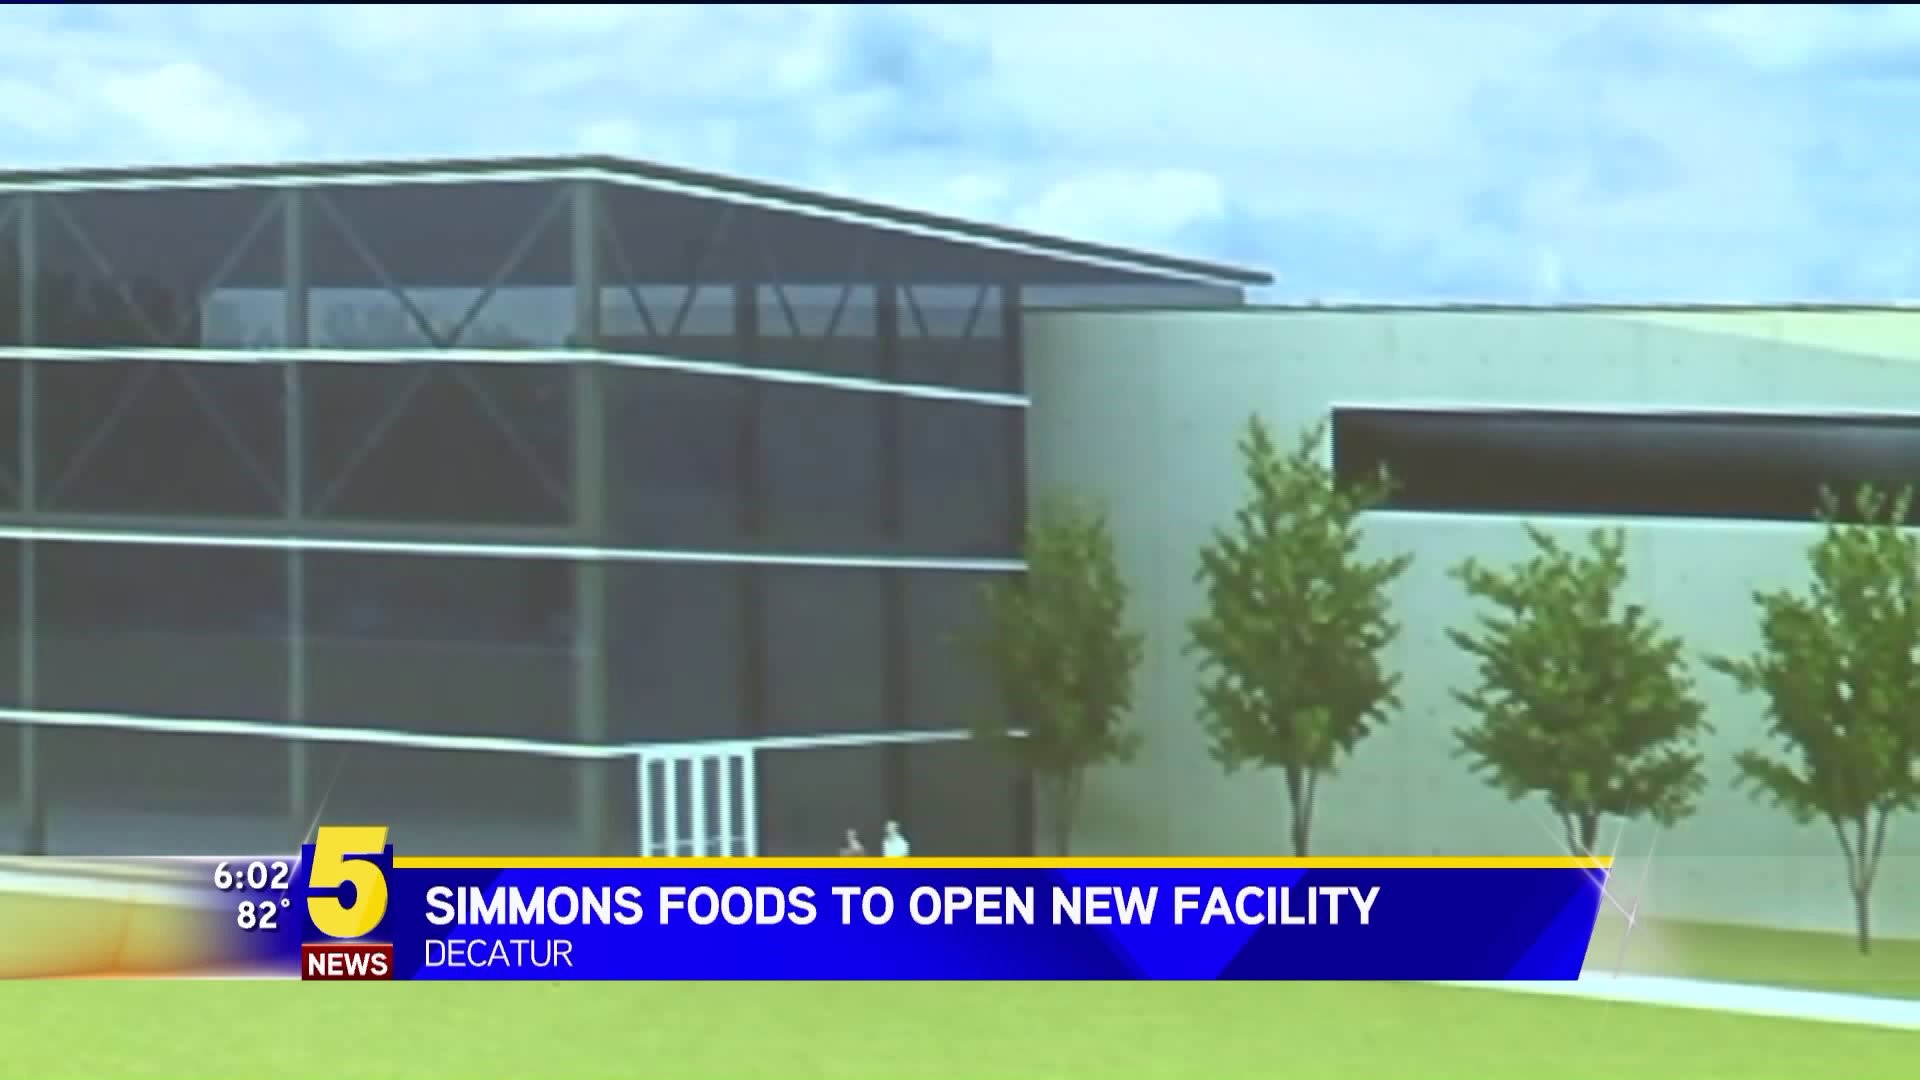 Simmons Foods To Open New Facility